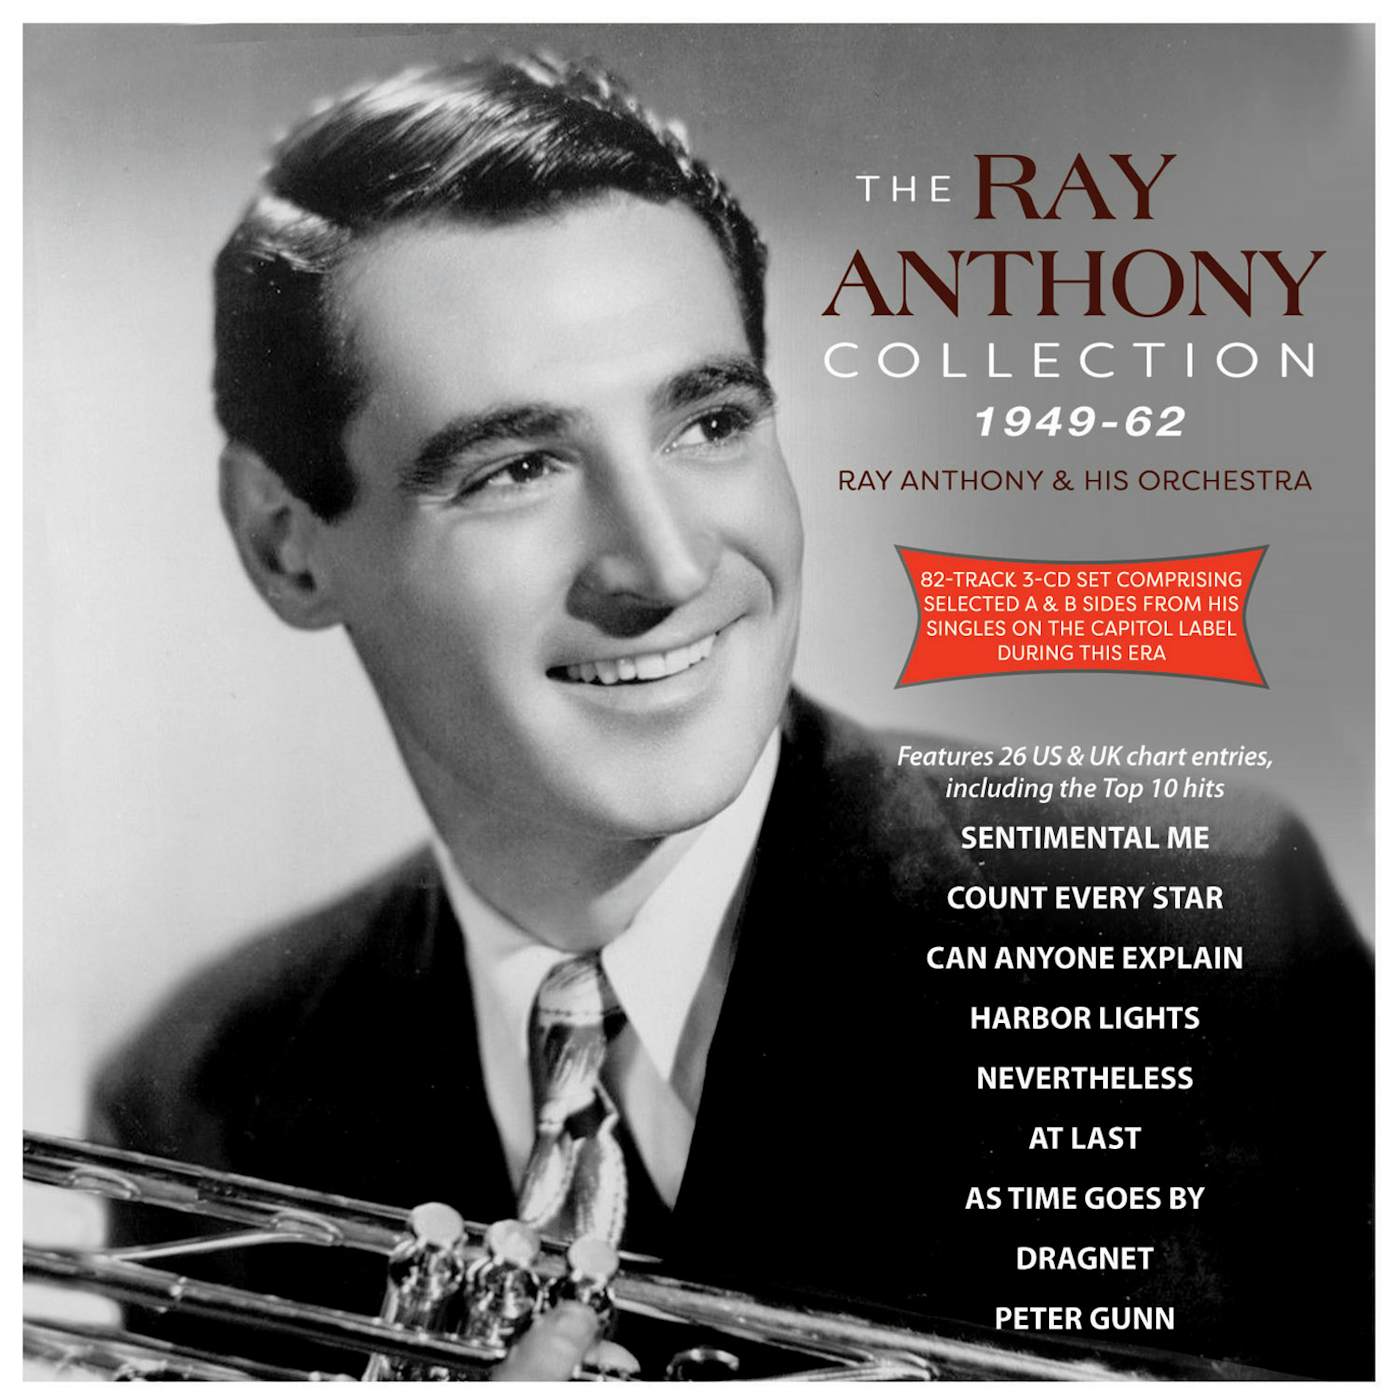 Ray Anthony COLLECTION 1949-62 CD